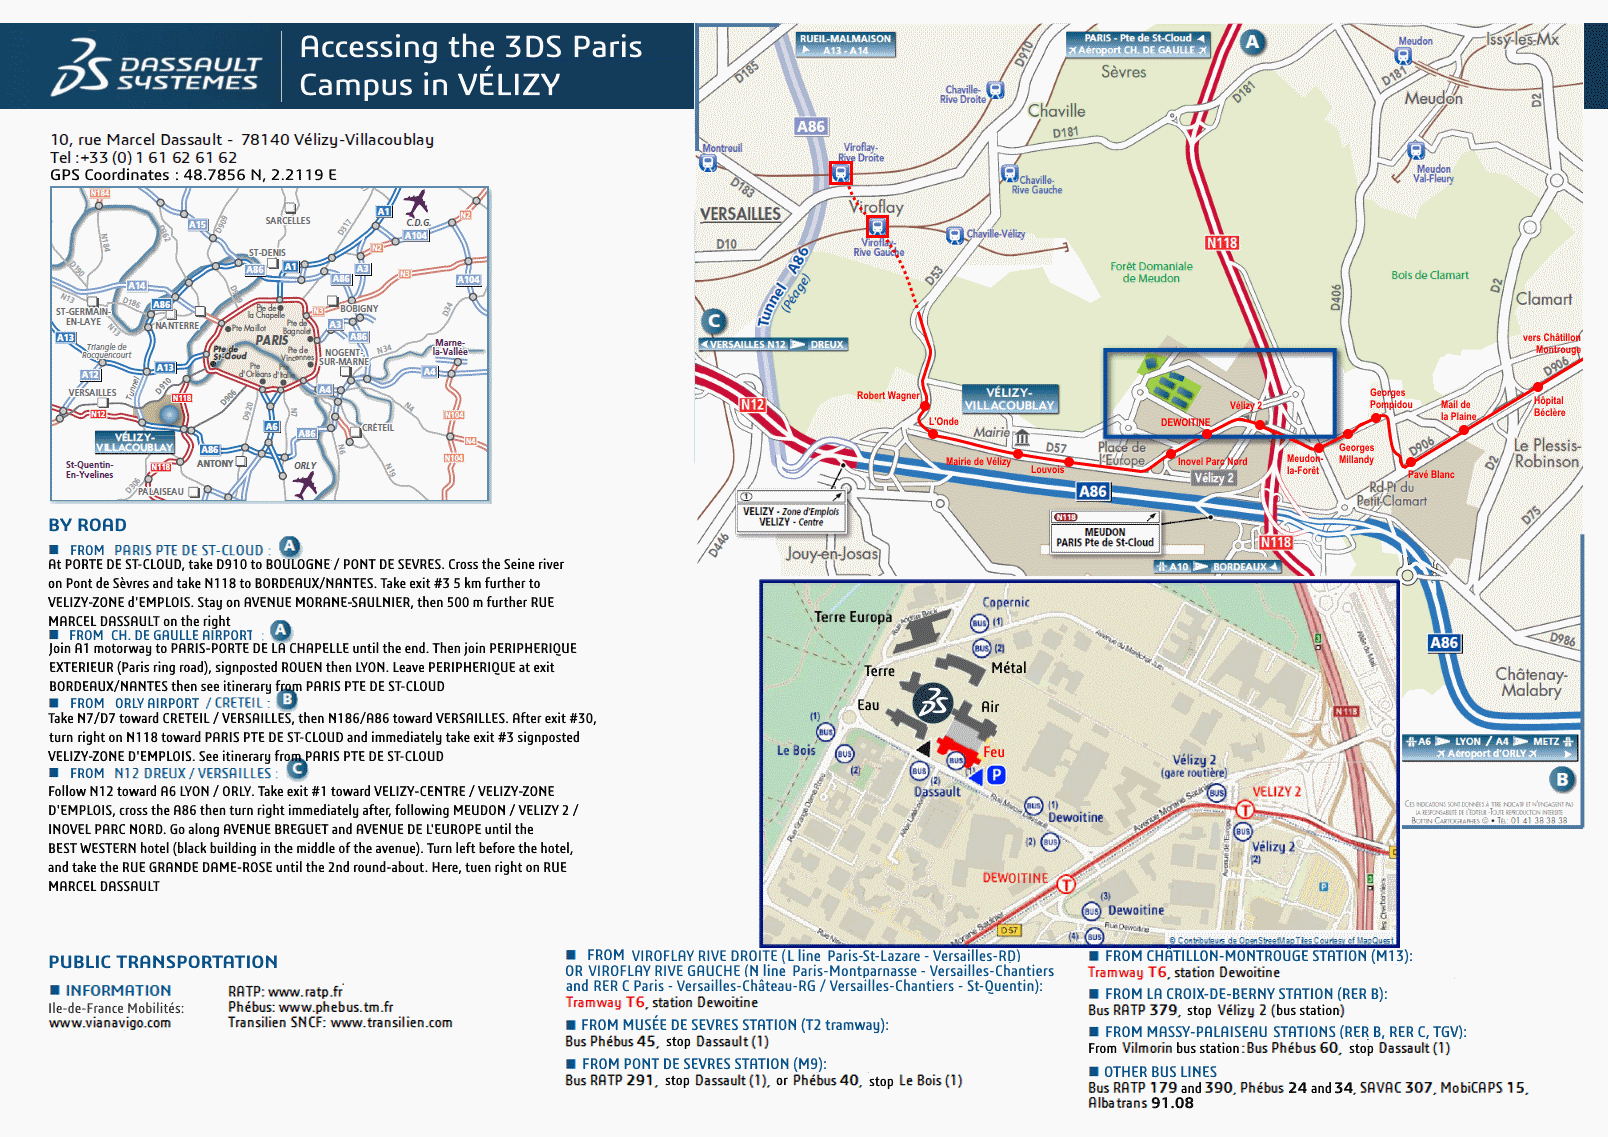 access-map-campus-velizy-janvier-2020-1hiuthwt.png